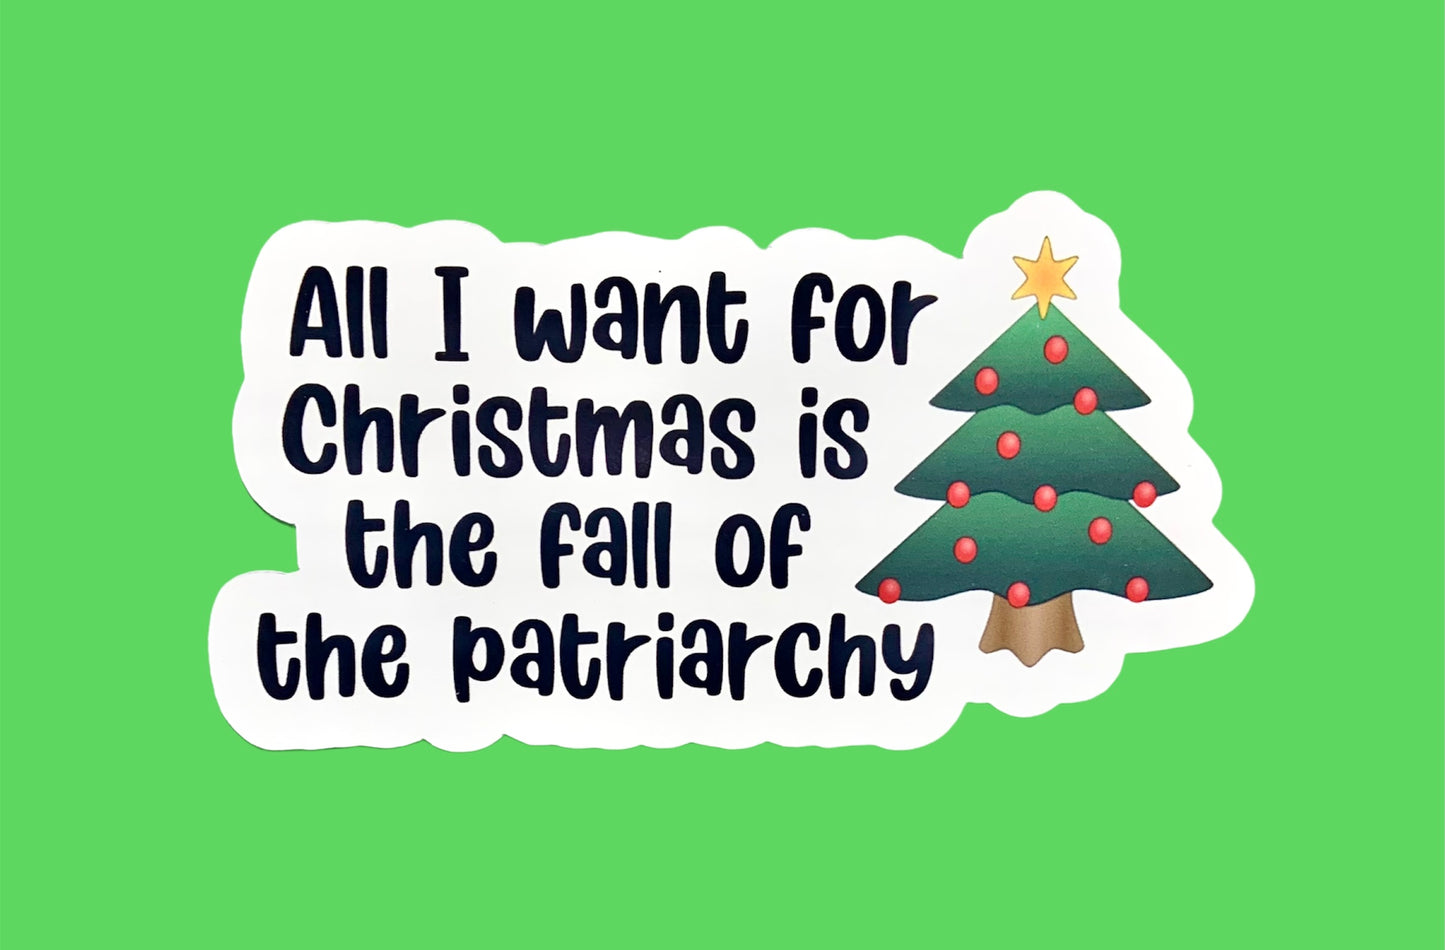 All I want for Christmas is the fall of the patriarchy (pack of 3 or 5 stickers)